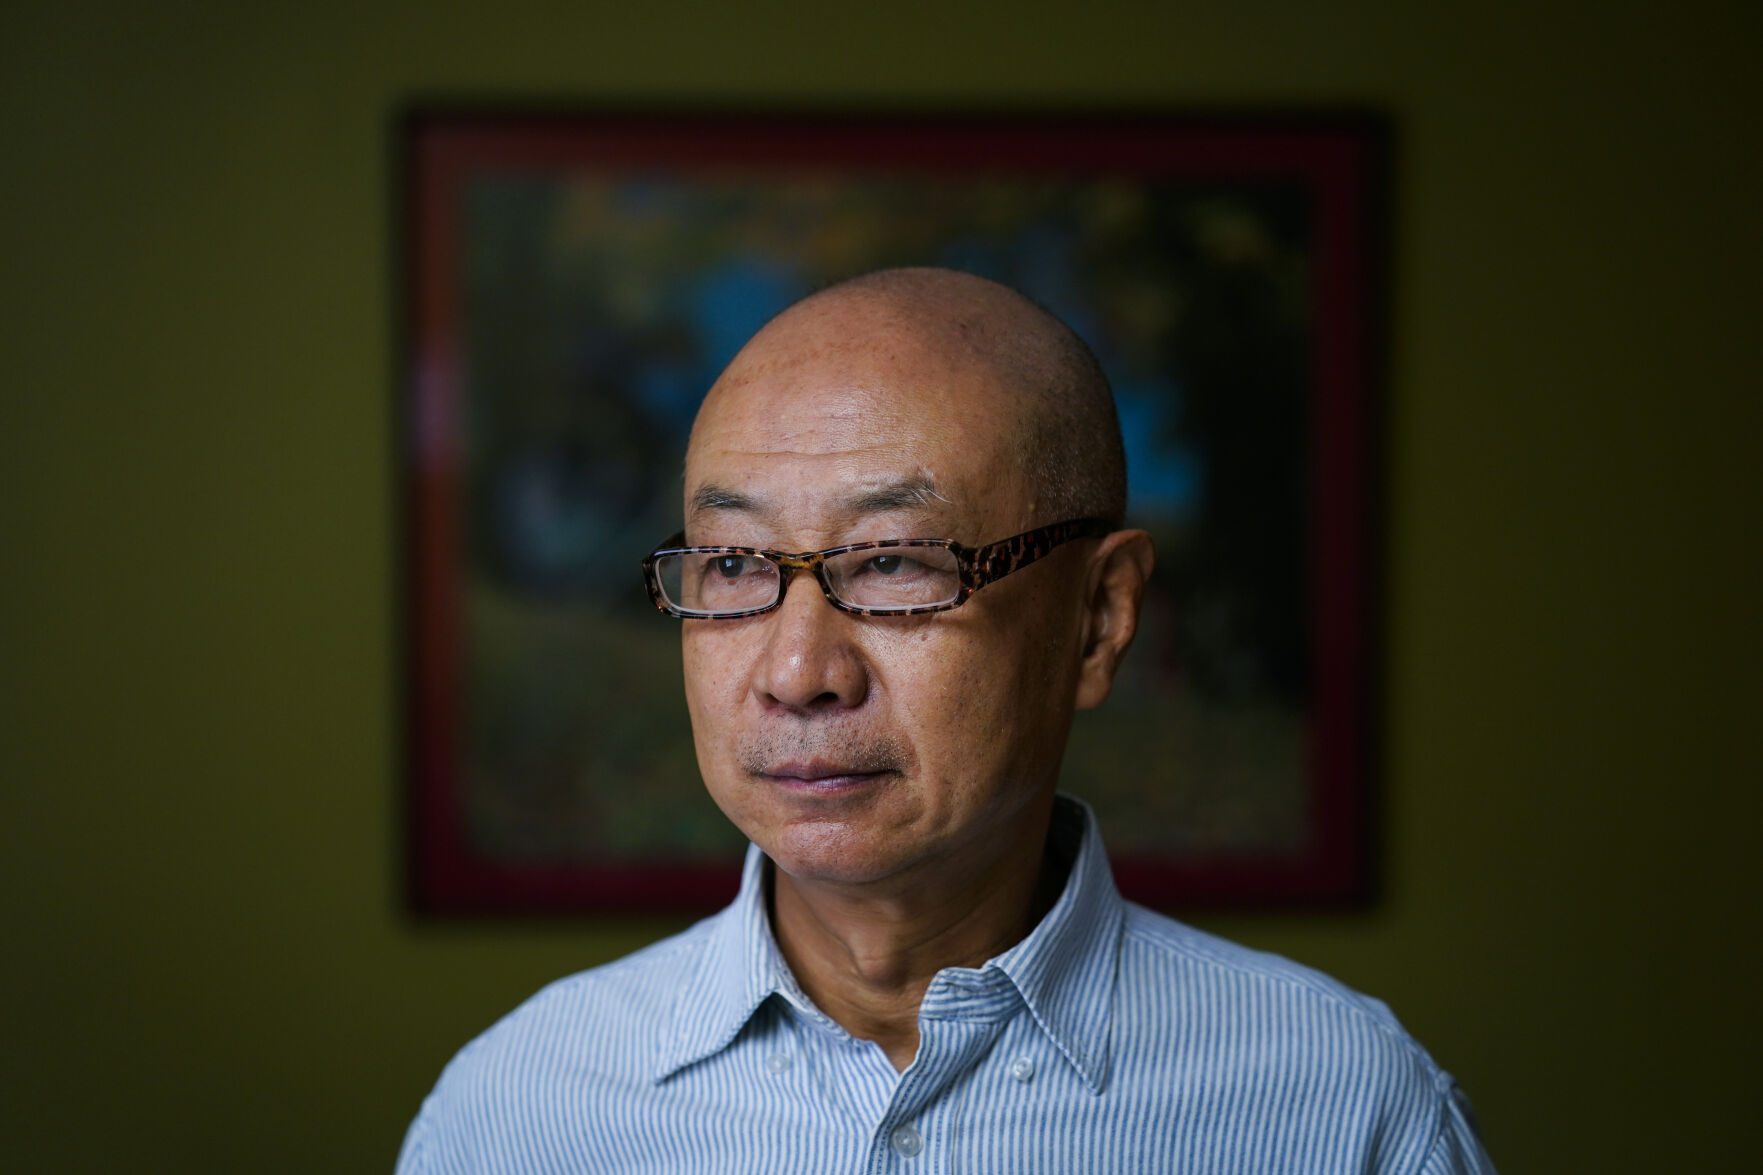 <p>Jerry Cheng poses for a photograph in Philadelphia, Friday, Nov. 4, 2022. The retired mechanical engineer cherishes his ability to participate in democracy...and especially his freedom to criticize politicians. (AP Photo/Matt Rourke)</p>   PHOTO CREDIT: Matt Rourke - staff, AP